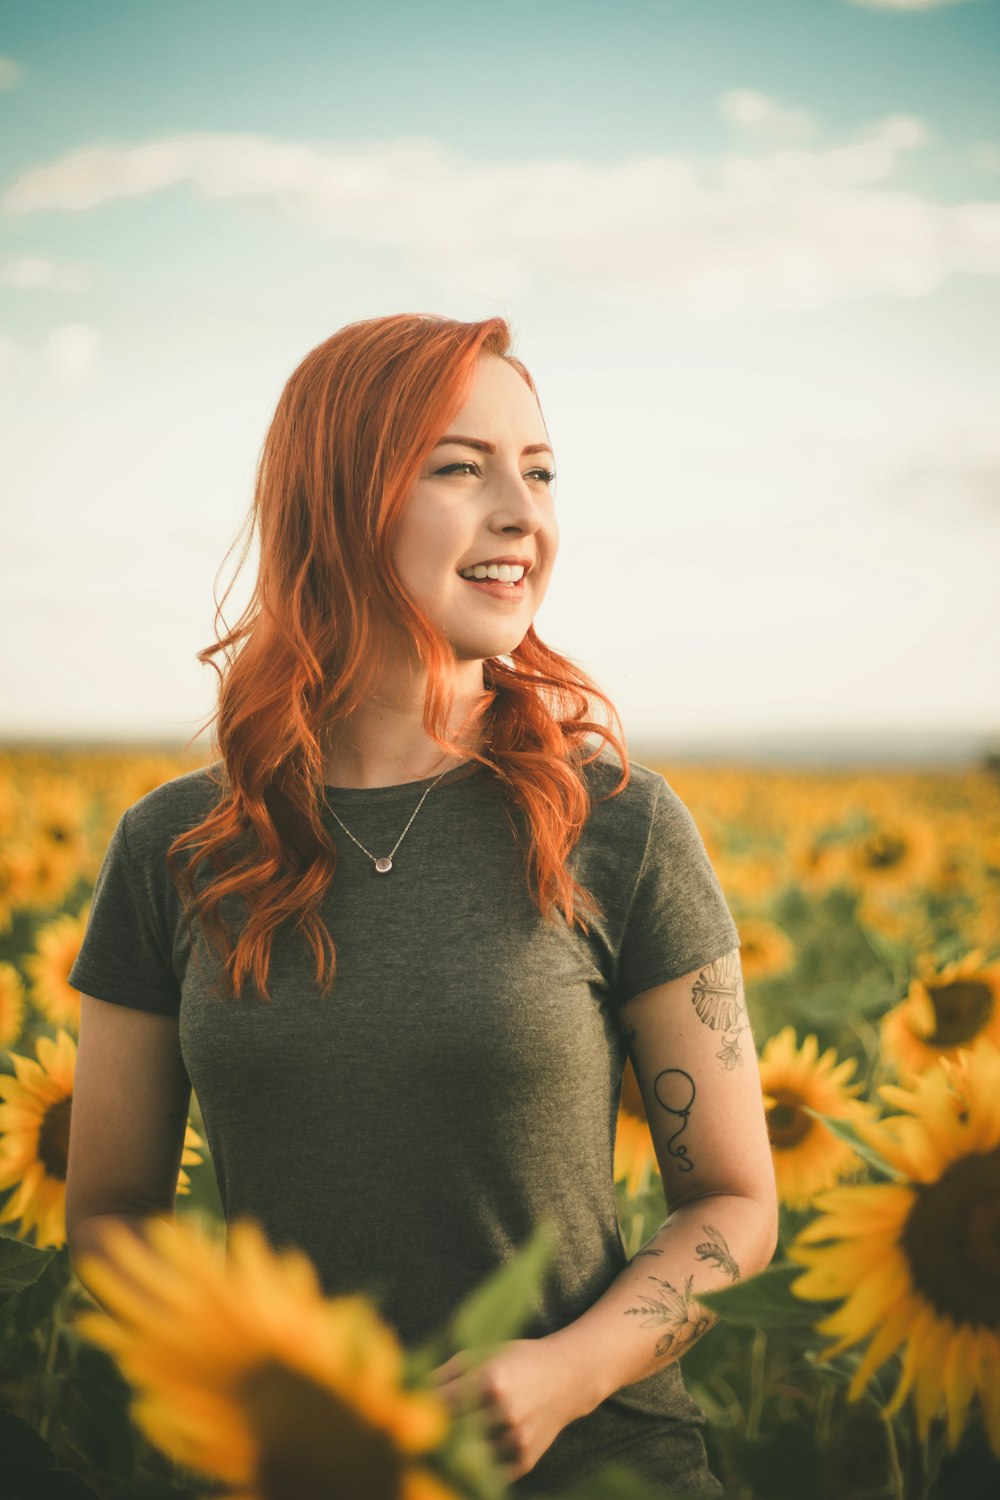 woman wearing gray t-shirt surrounded sunflowers